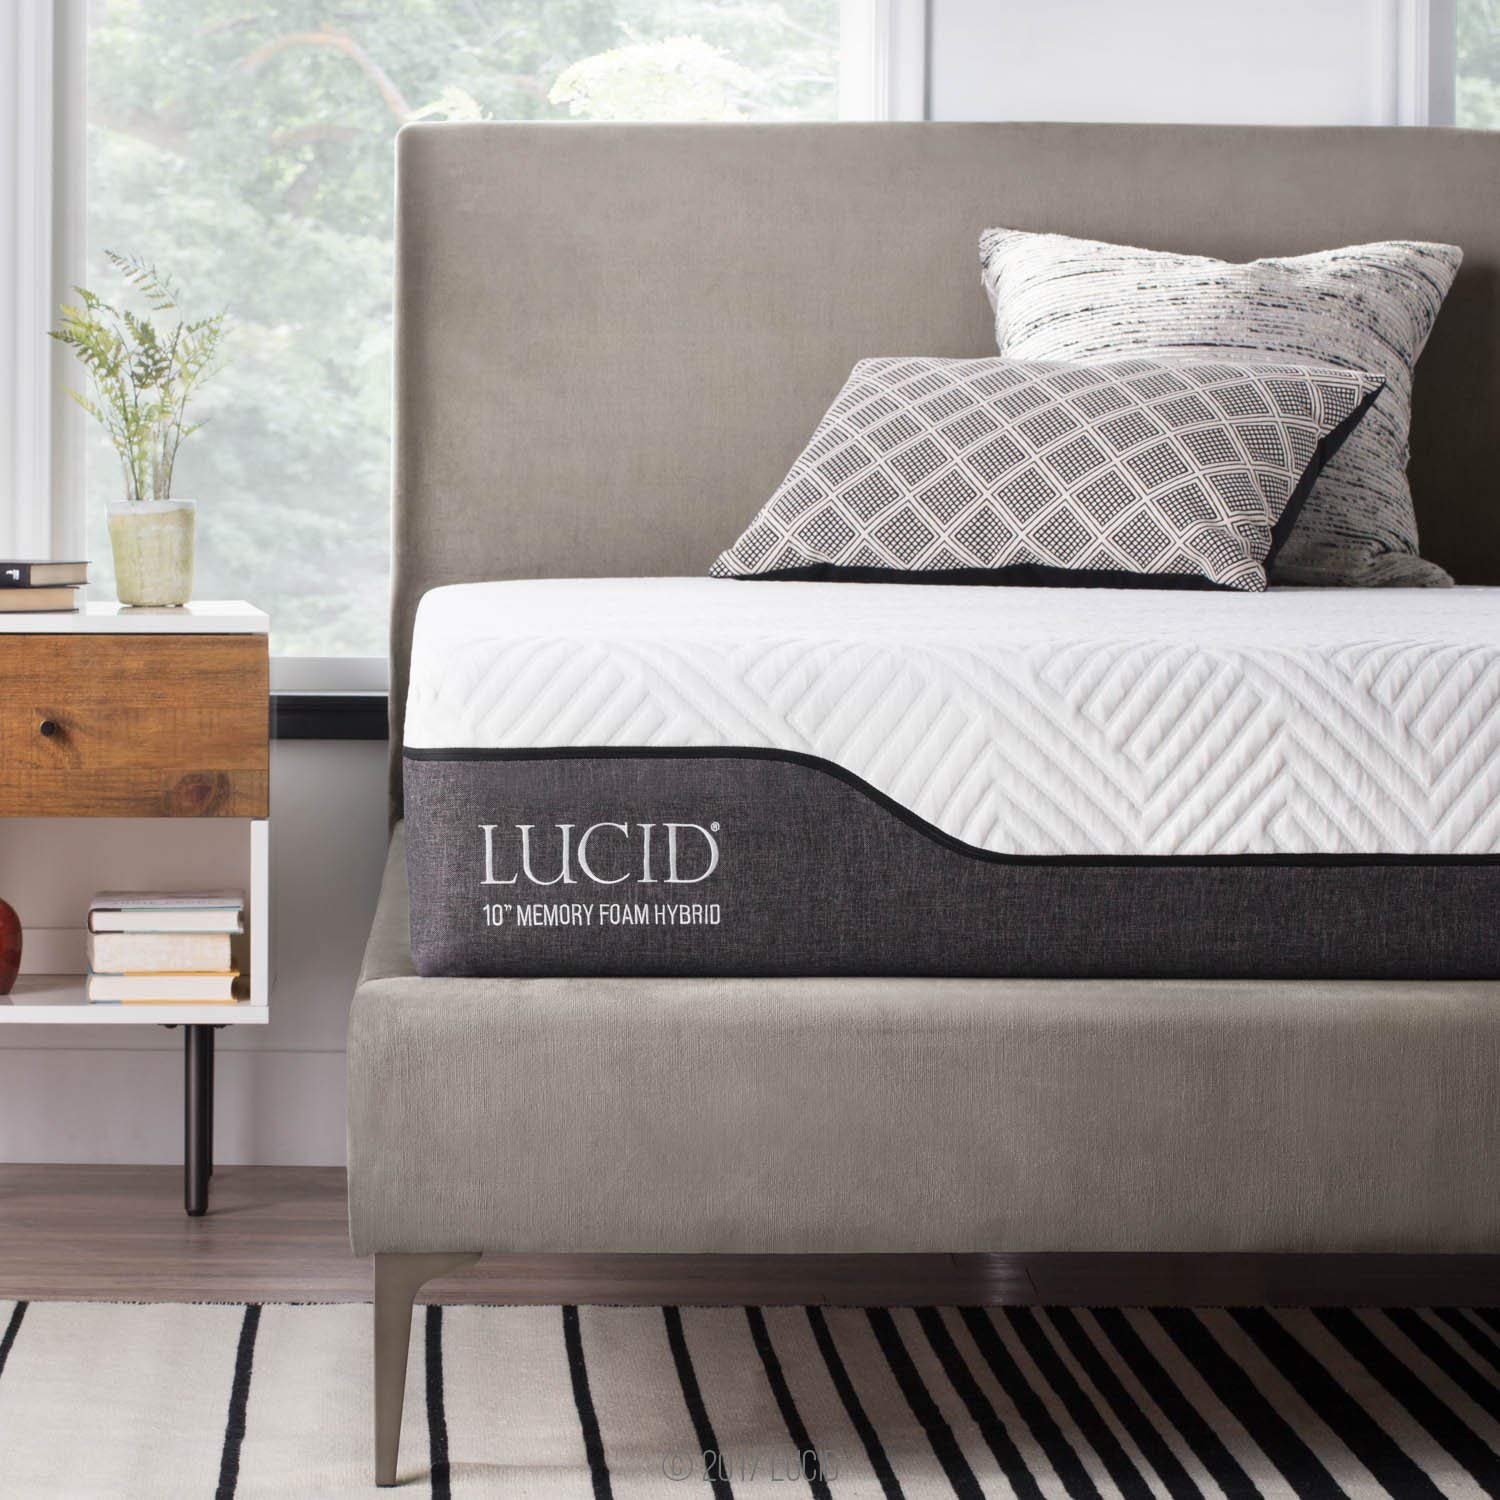 LUCID 10 Inch Queen Hybrid Mattress - Bamboo Charcoal and Aloe Vera Infused Memory Foam - Moisture Wicking - Odor Reducing - CertiPUR-US Certified